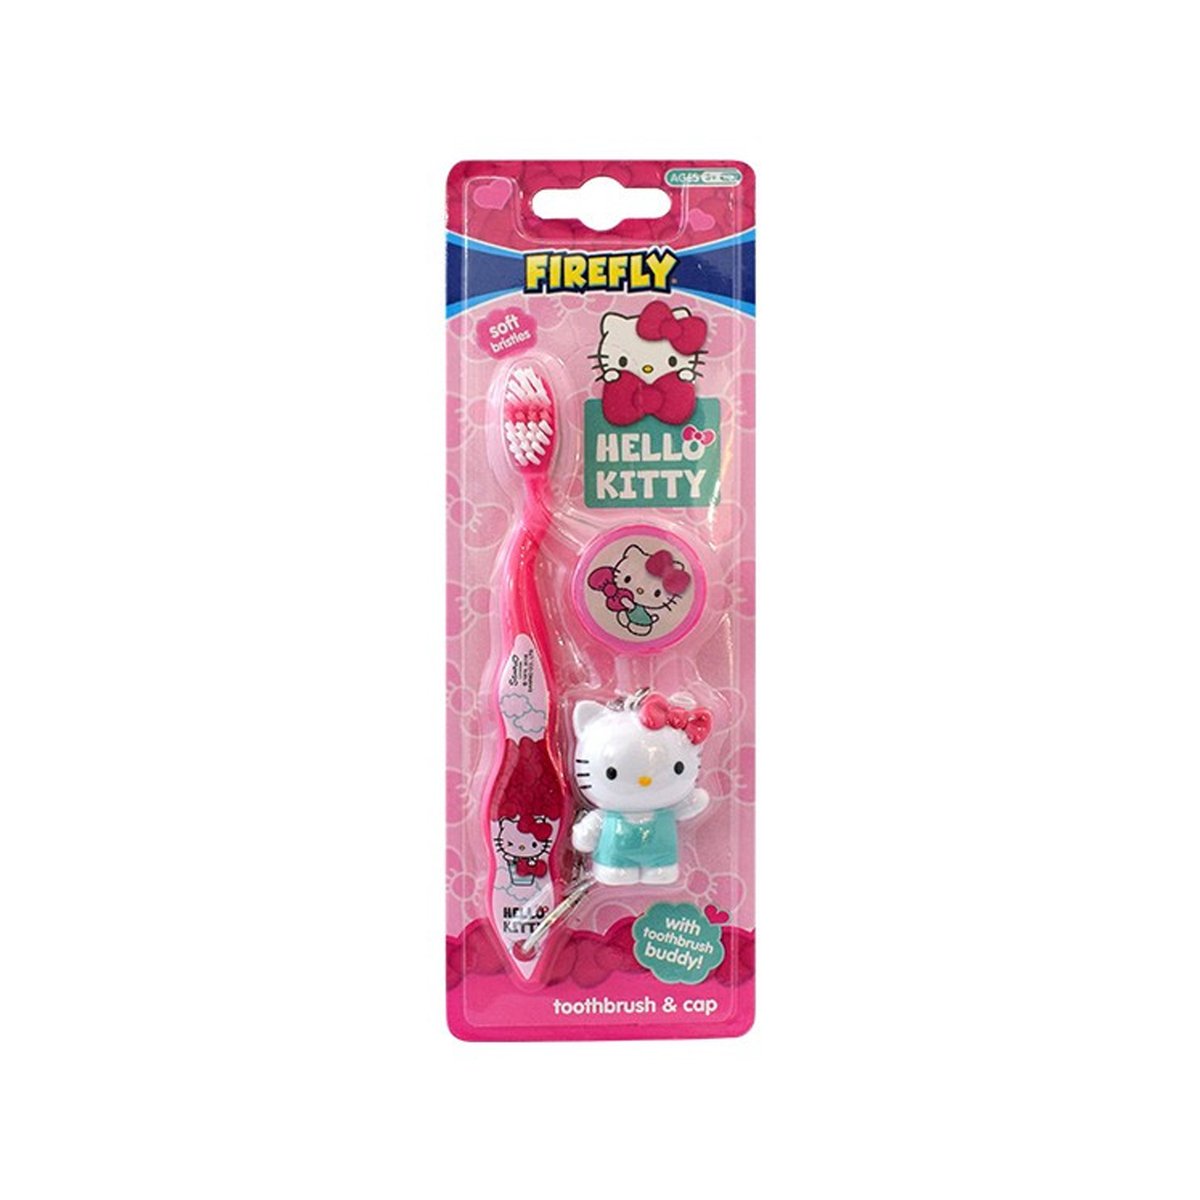 Firefly Hello Kitty Toothbrush W/Cap & Toy 1 pc